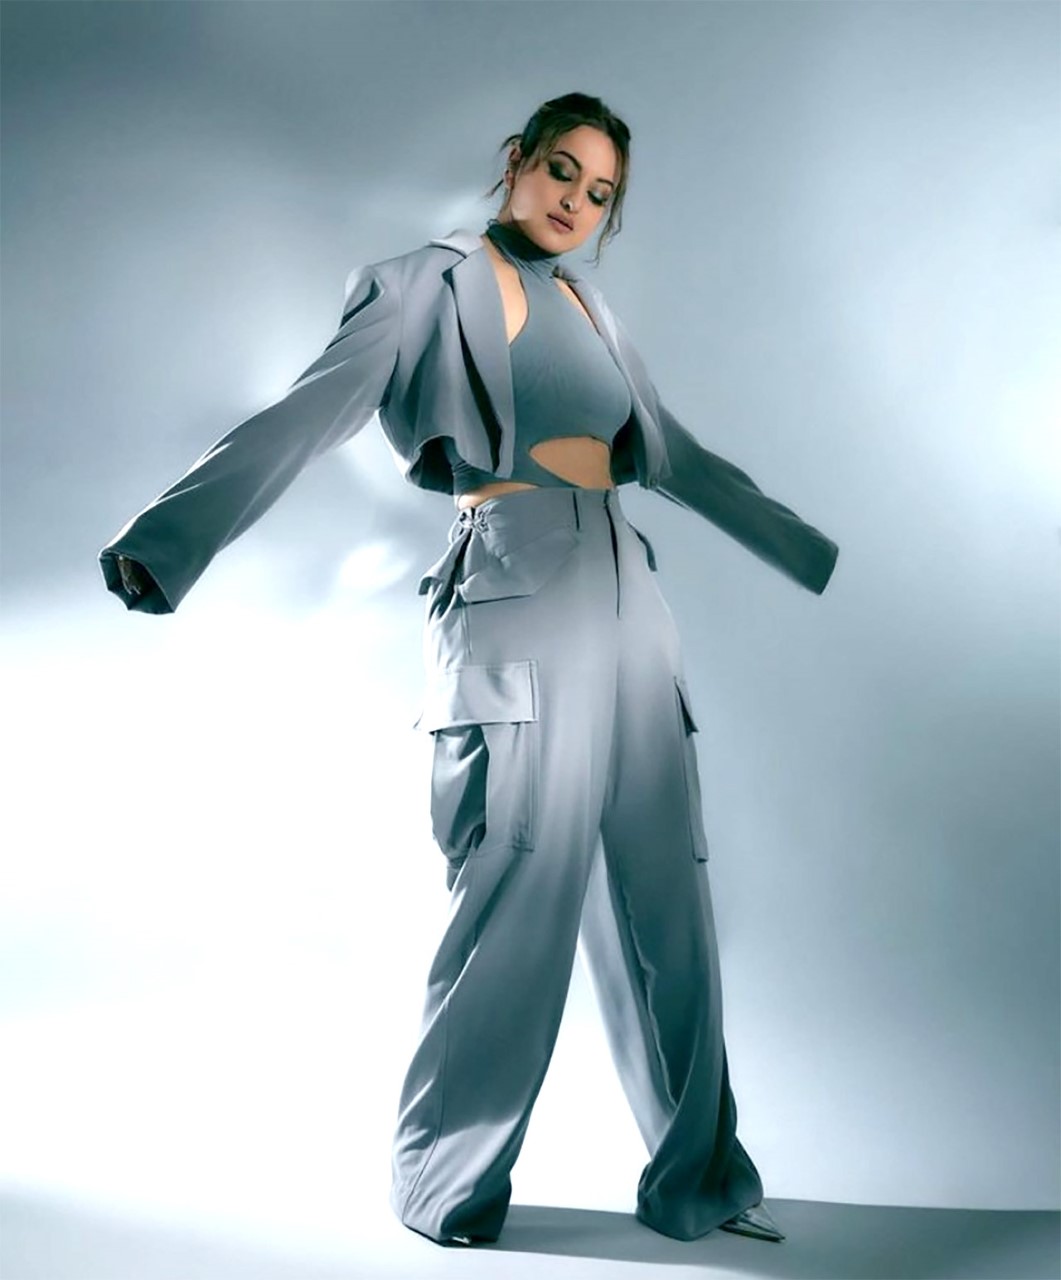 Sonakshi Sinha slays in shades of grey, setting the fashion bar high for the promotions of her upcoming web series Dahaad